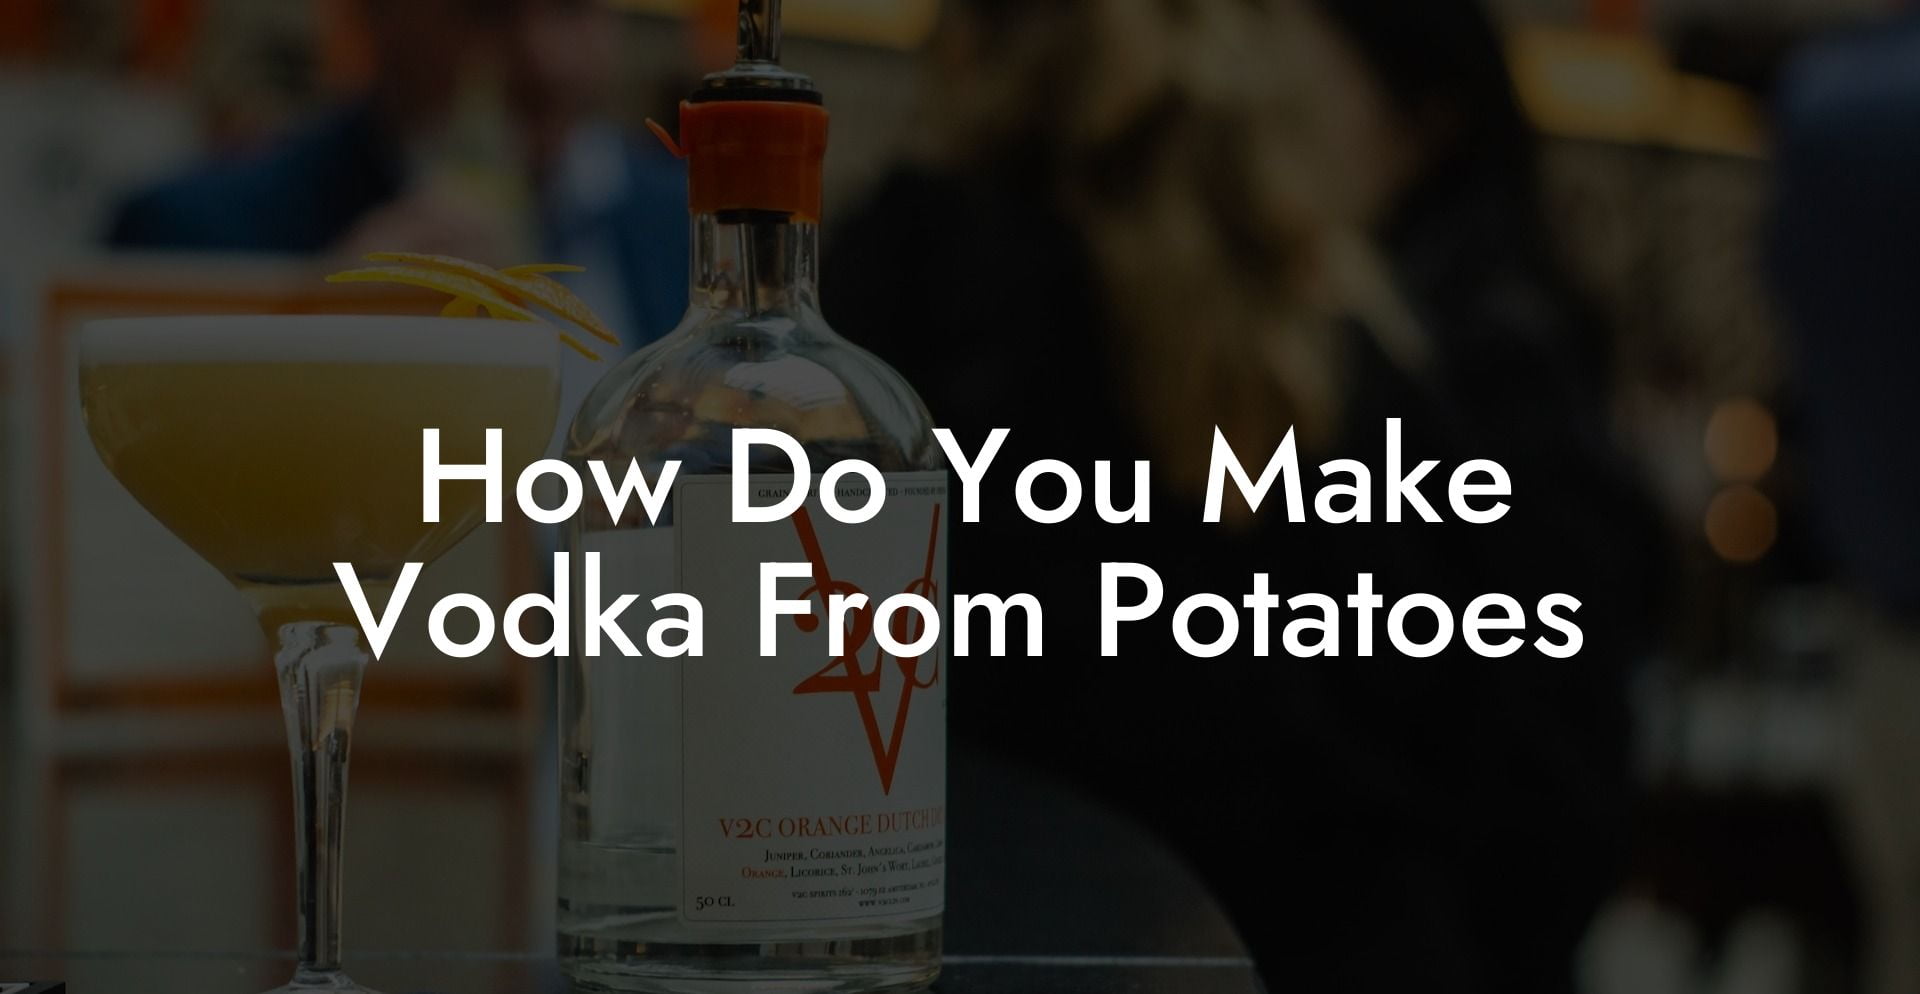 How Do You Make Vodka From Potatoes